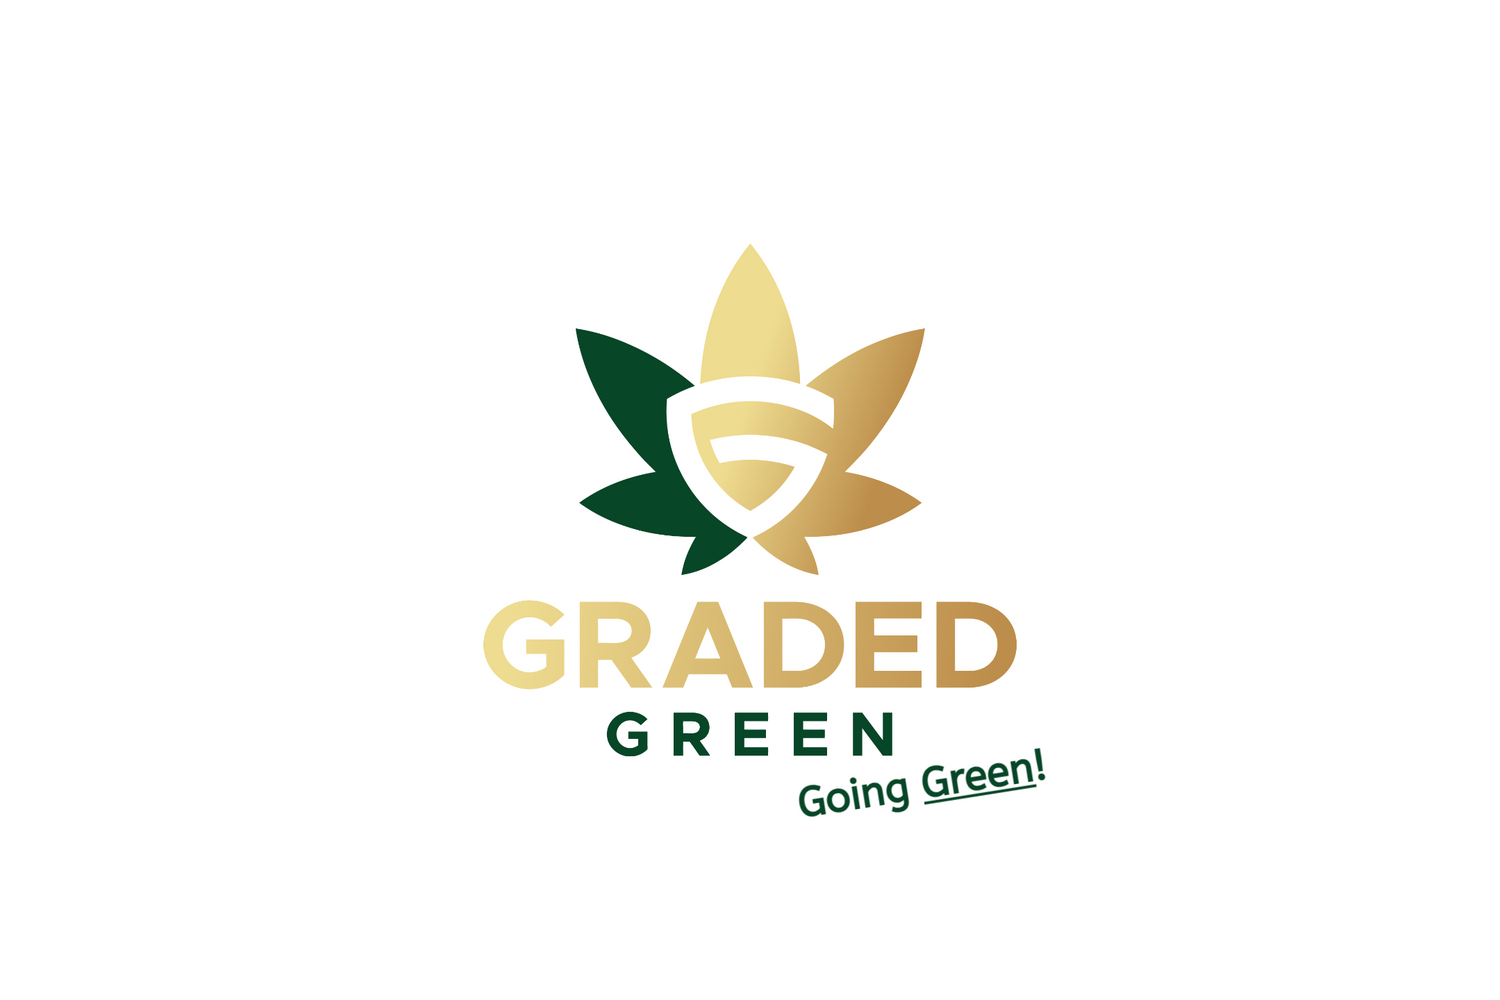 Graded Green: Going Green - Our Sustainability Pledge